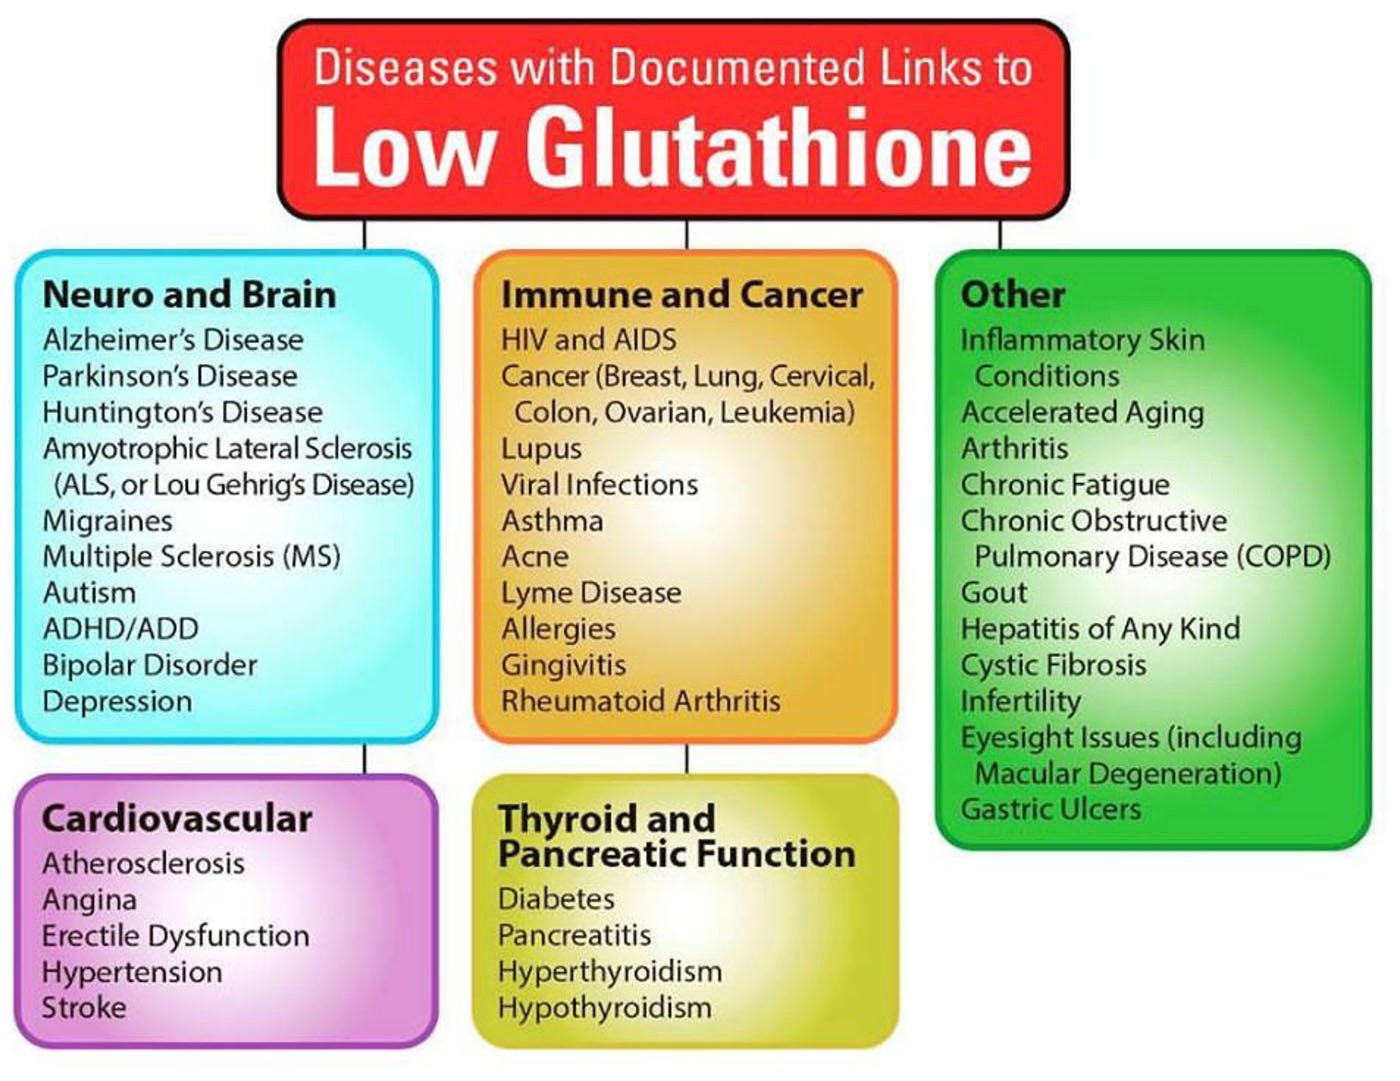 Diseases Associated with Low Glutathione